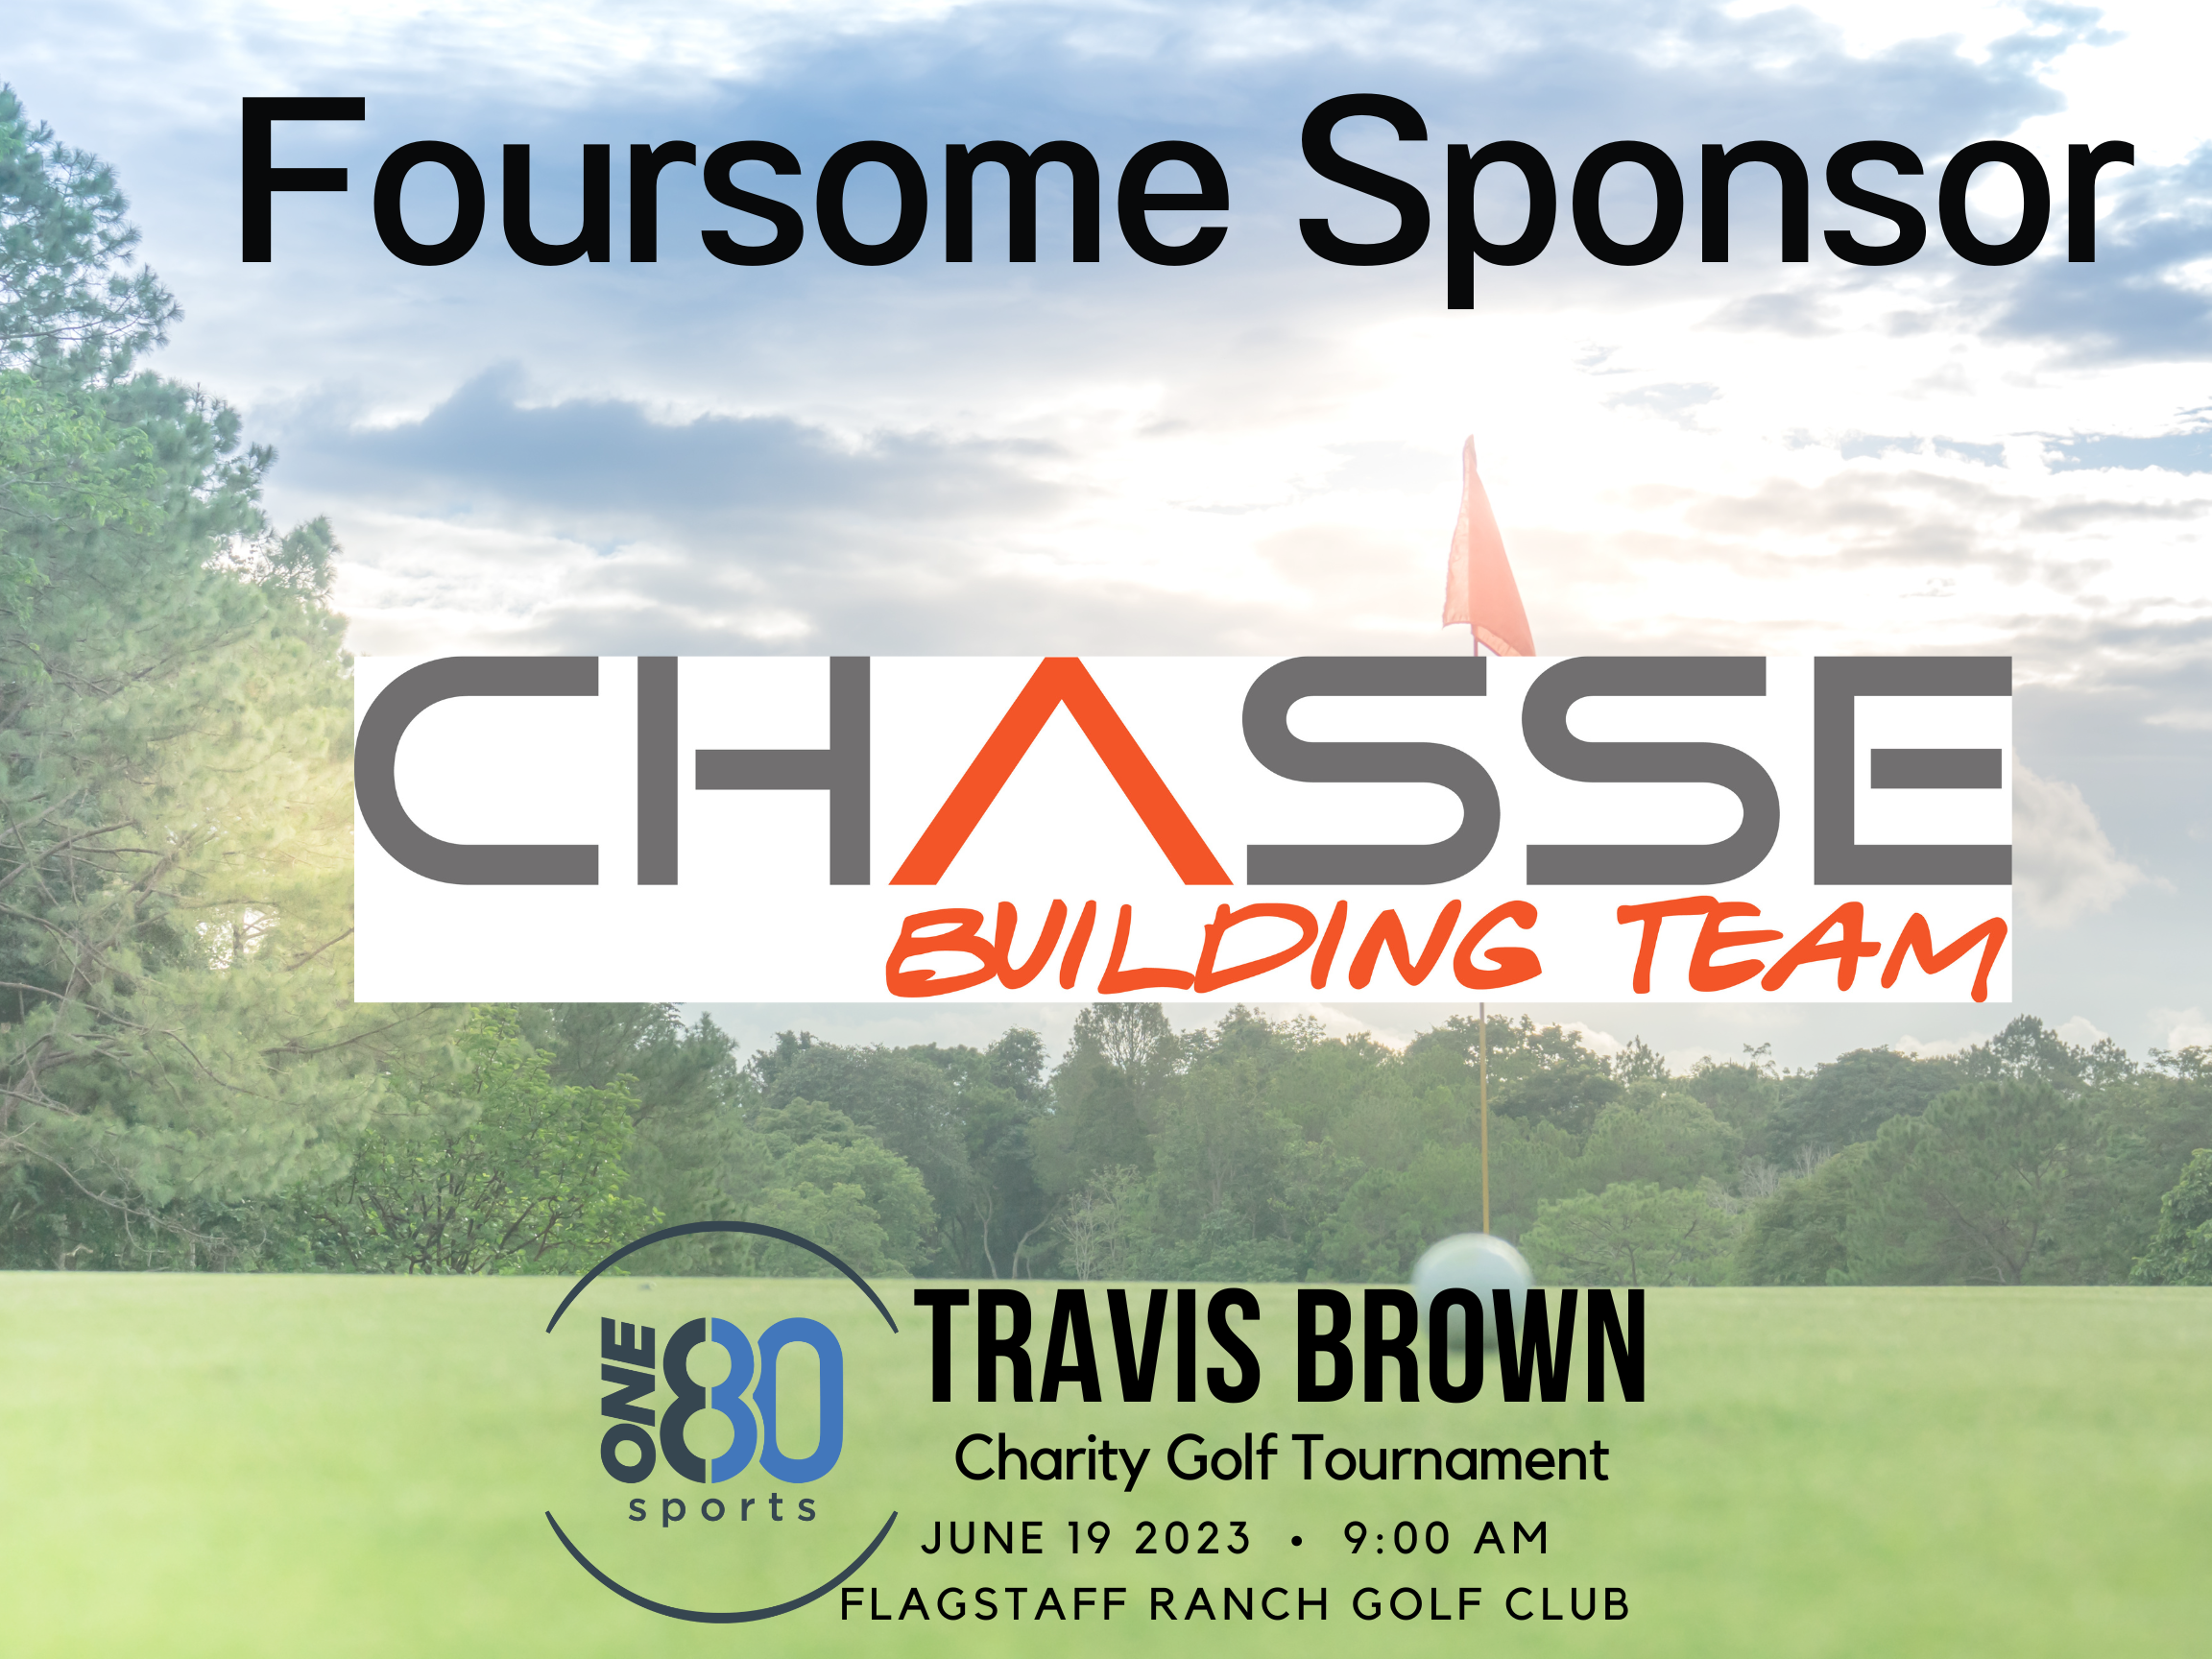 Chasse Building Team Foursome Sponsor Post.png